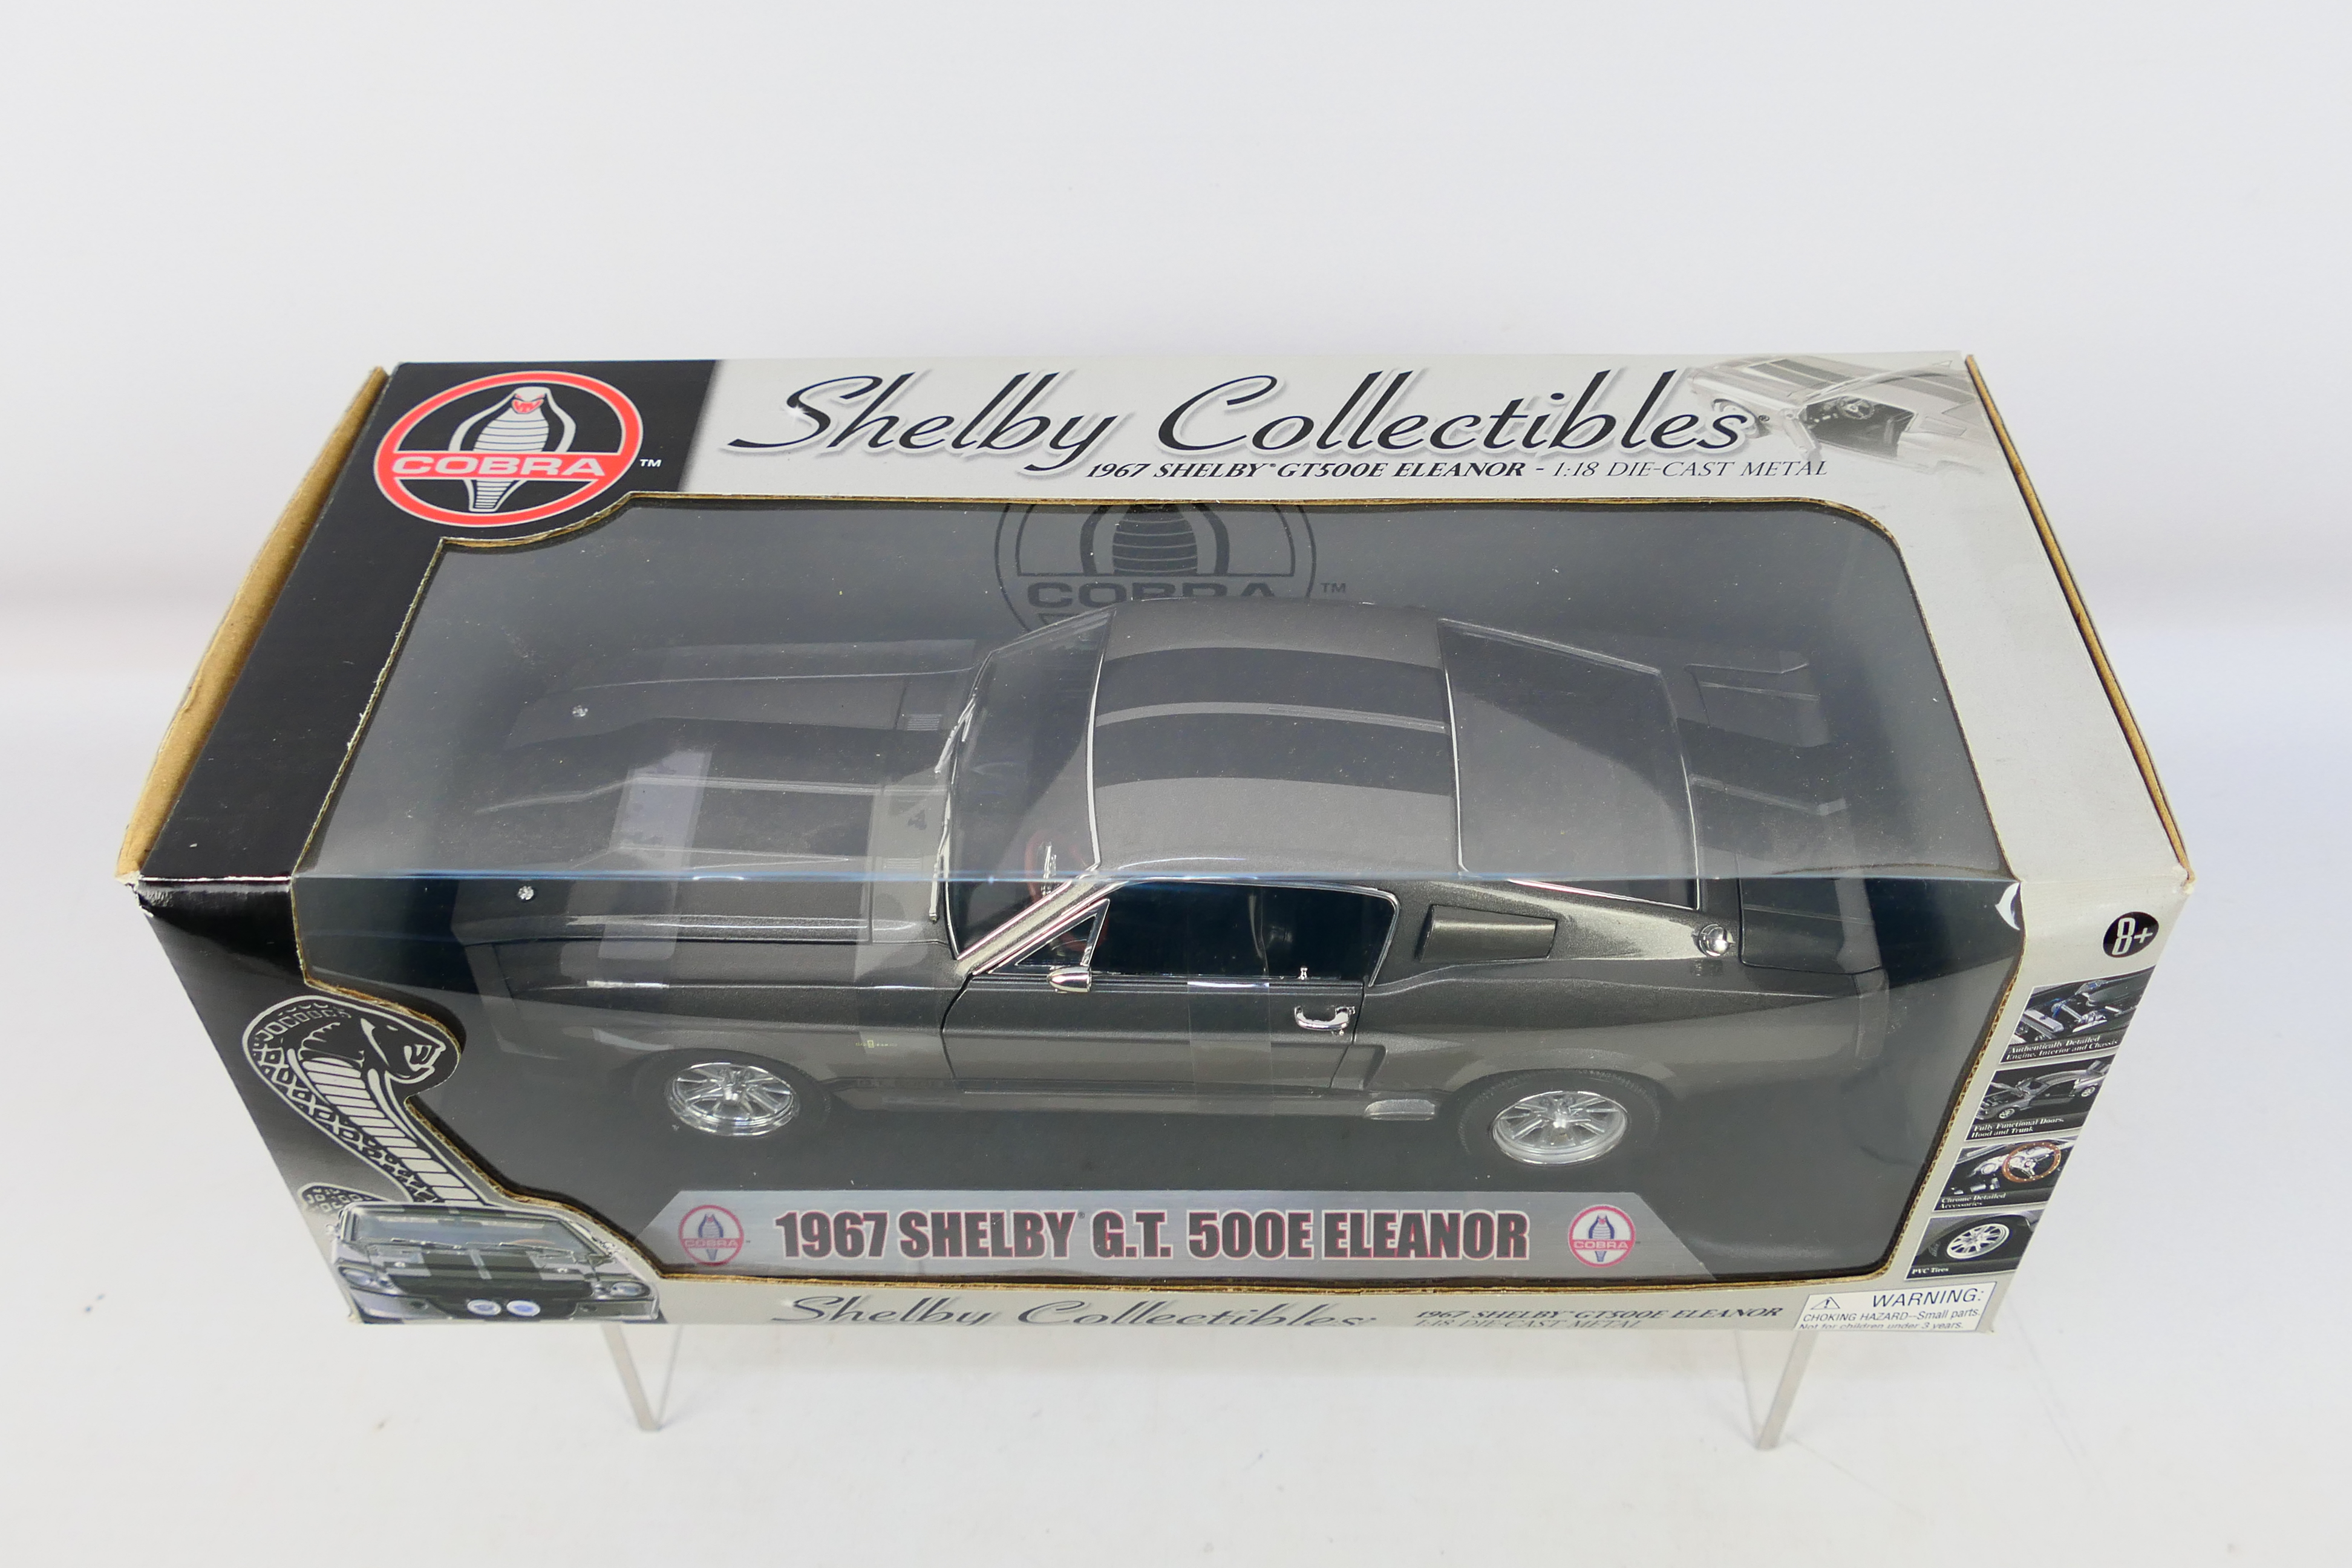 Shelby Collectibles - A boxed Shelby Collectibles 1:18 scale 1967 Shelby GT 500E 'Eleanor'. - Image 3 of 3